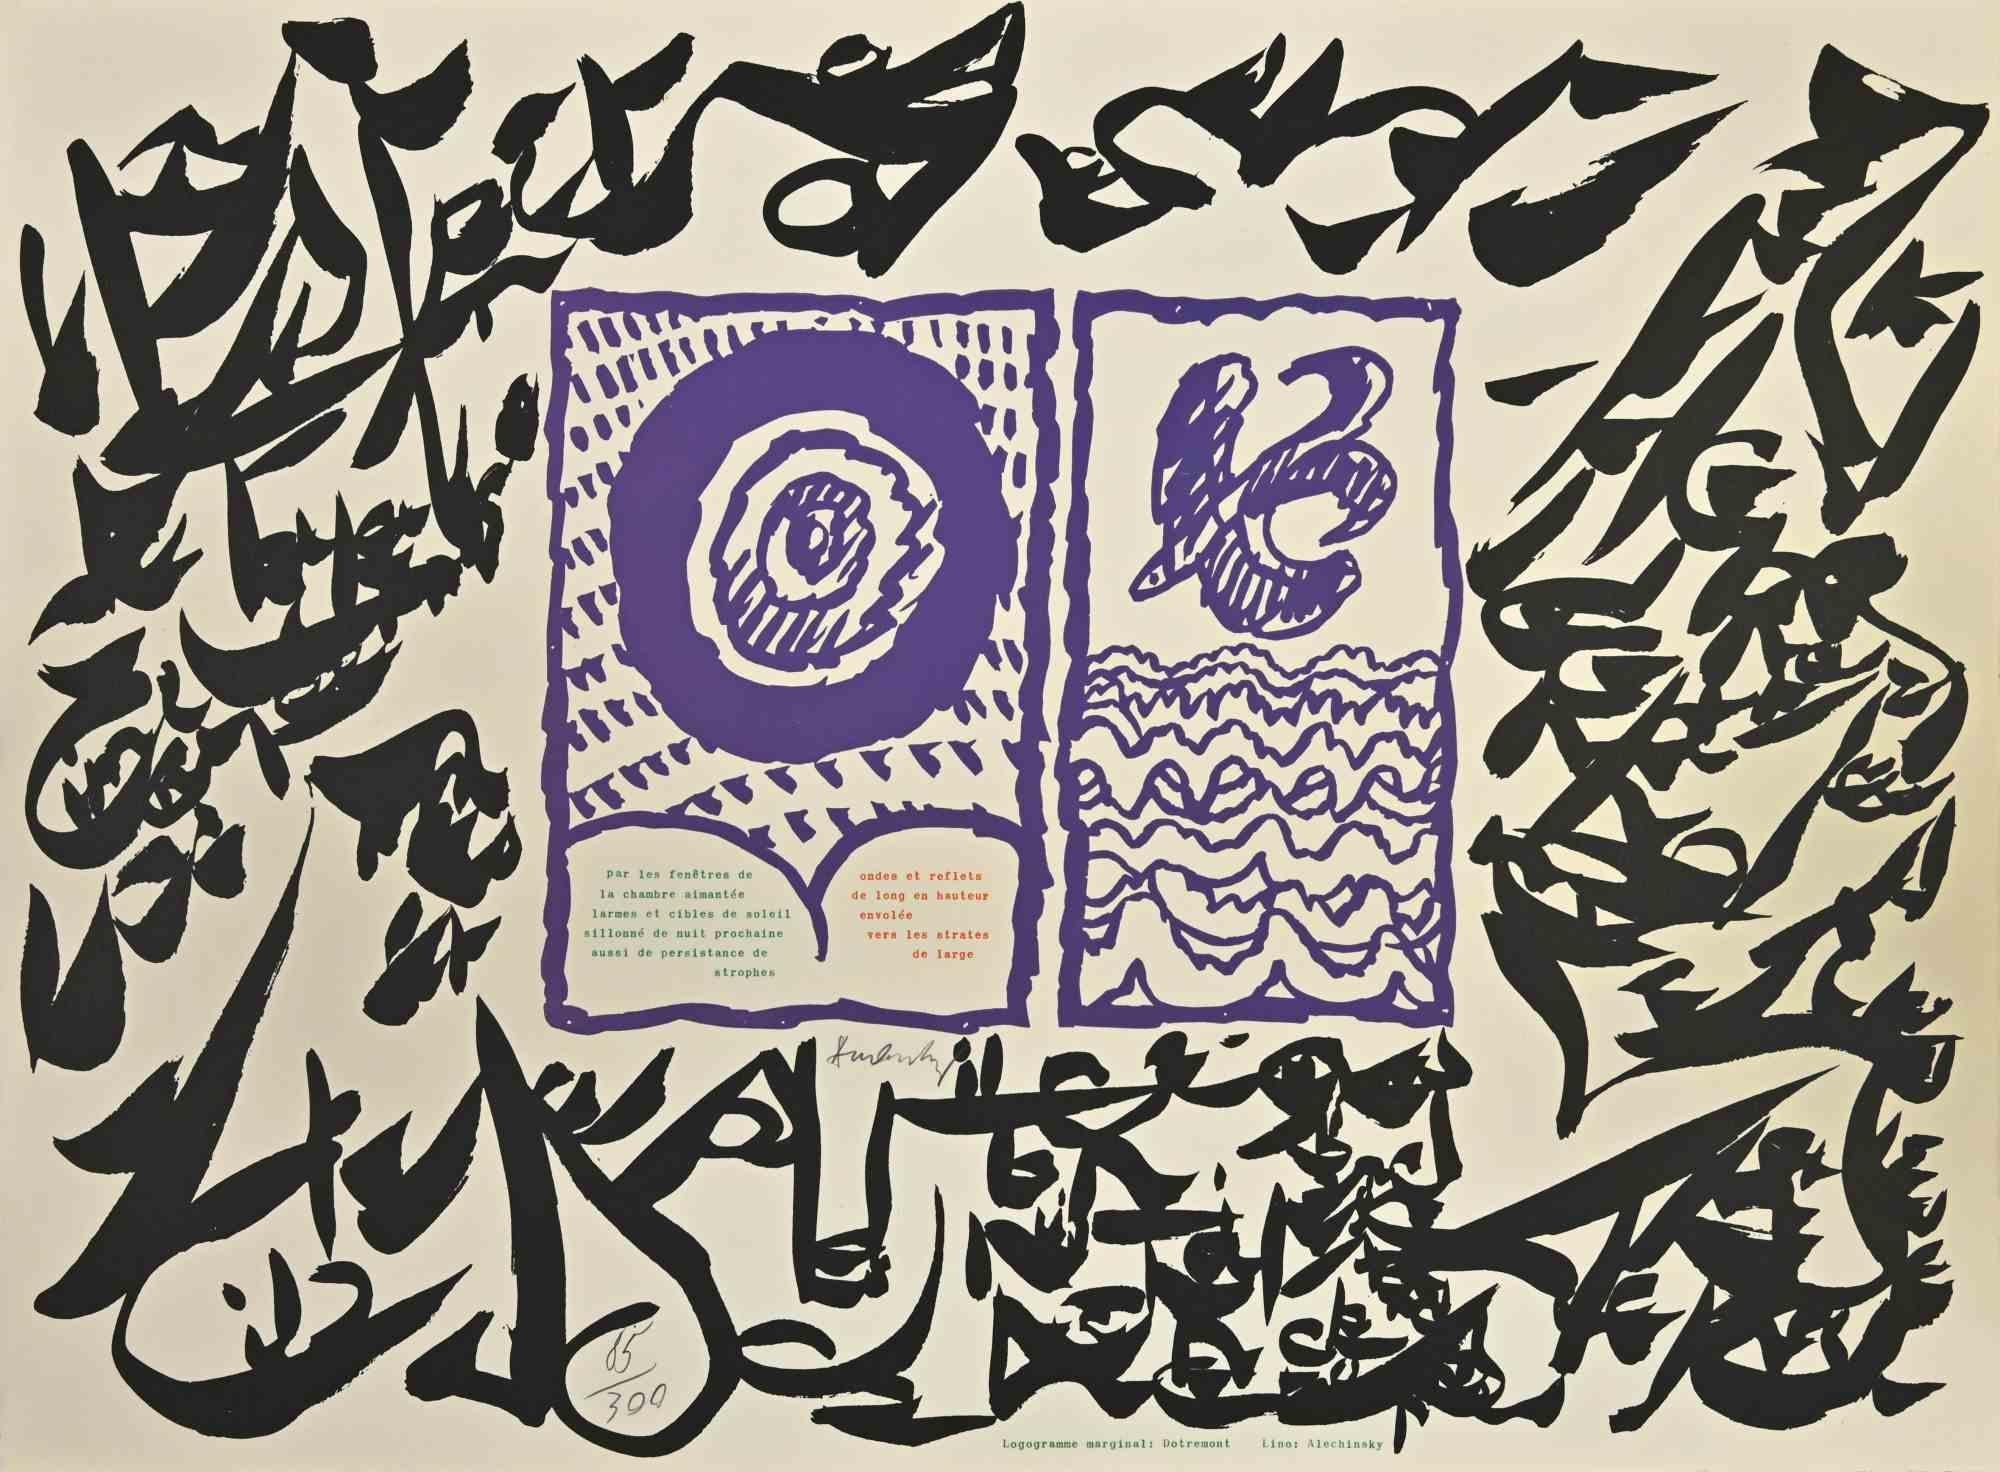  Linolog I et Linolog II is a Linocut print realized by the Artists Pierre Alechinsky and Christian Dotremont  in 1972.

Hand signed "Alechinsky" and Monogrammed on the right margin "Logogramme marginal: Dotremont", "Lino"Alechinsky". Numbered on